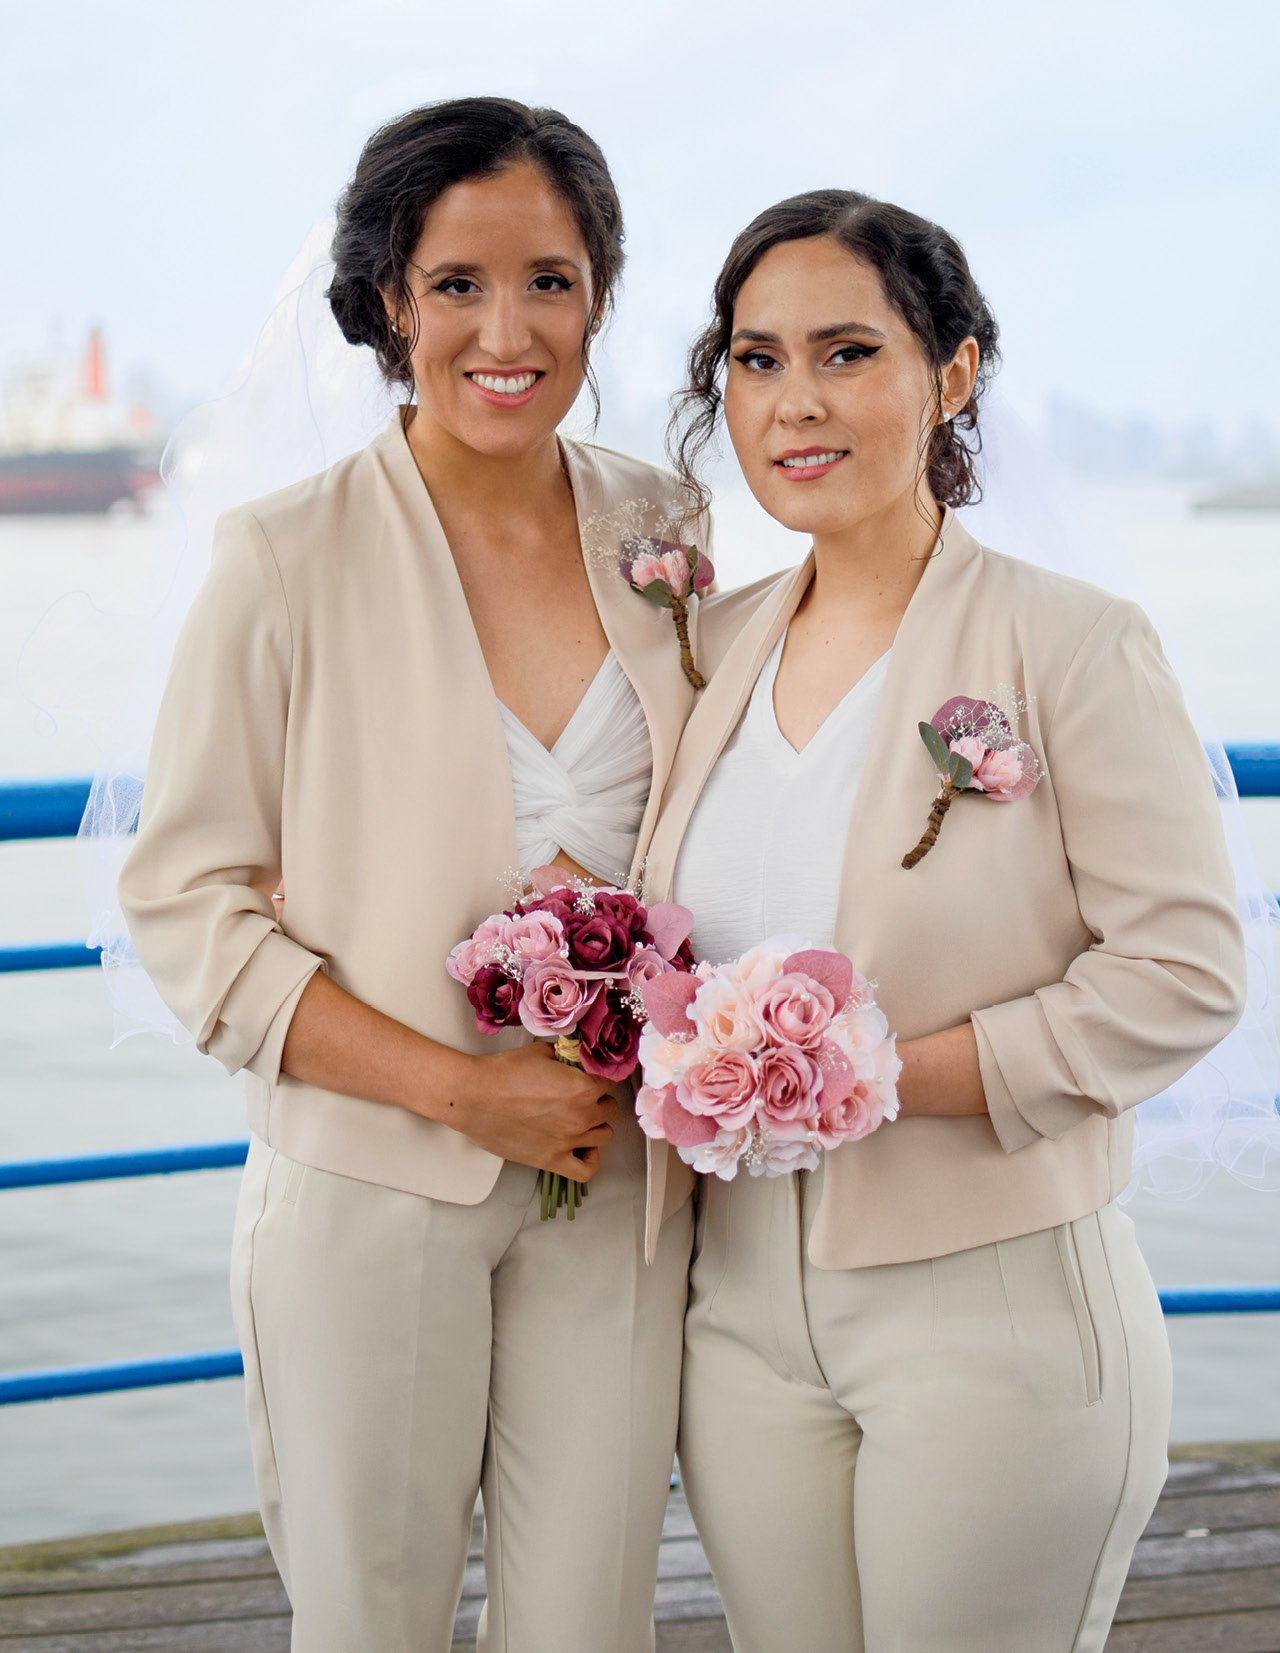 A newlywed female couple both with dark hair, both wearing cream suits